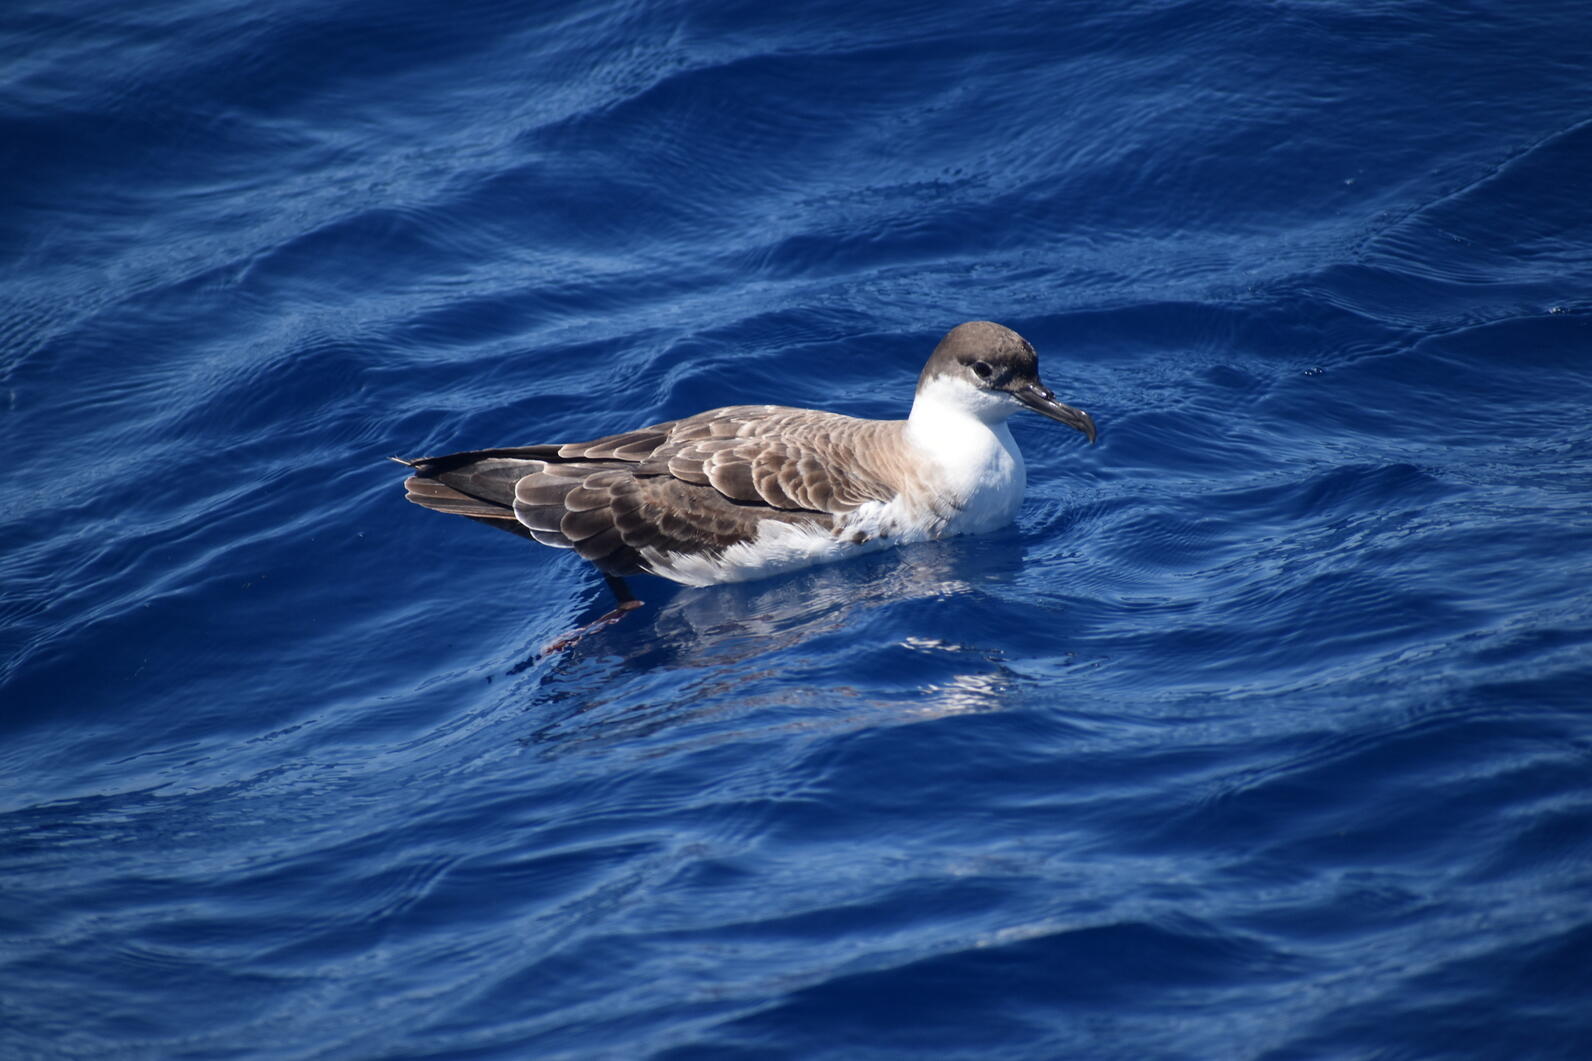 A Great Shearwater sits on the ocean water and looks to the right.